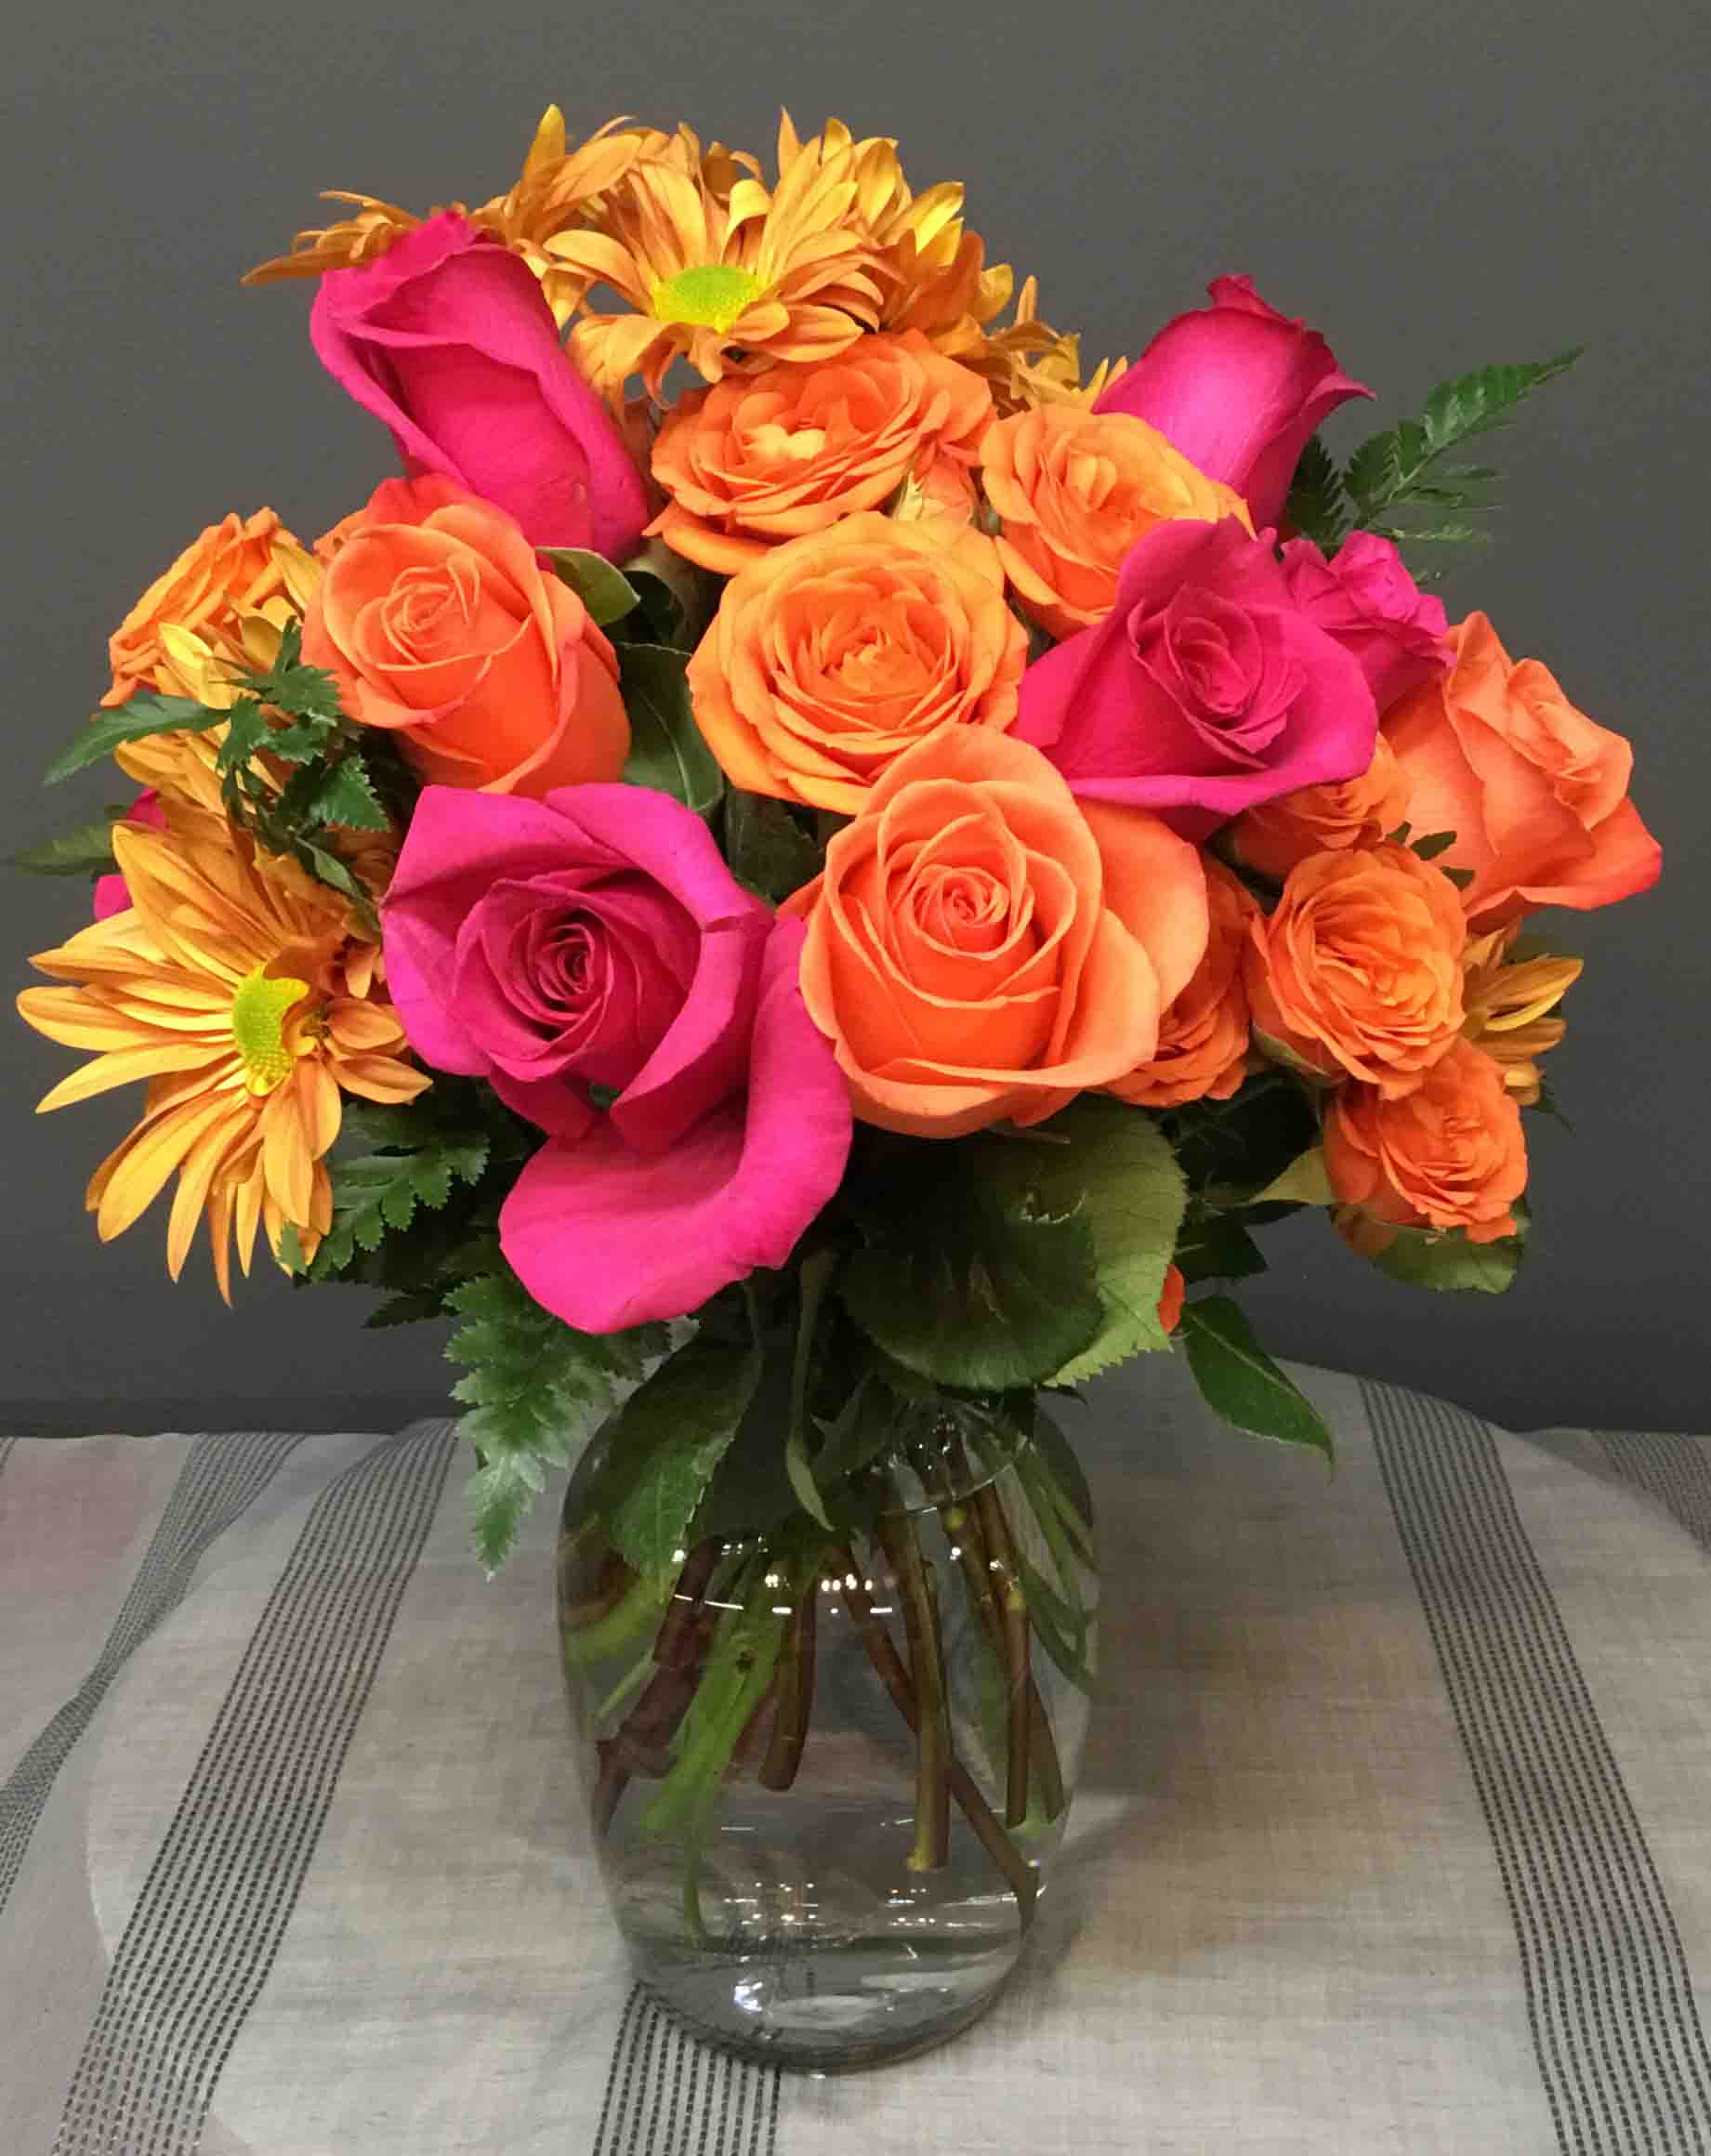 How Sweet It Is - Bright colors to brighten anyone's day! Send it to someone special today 